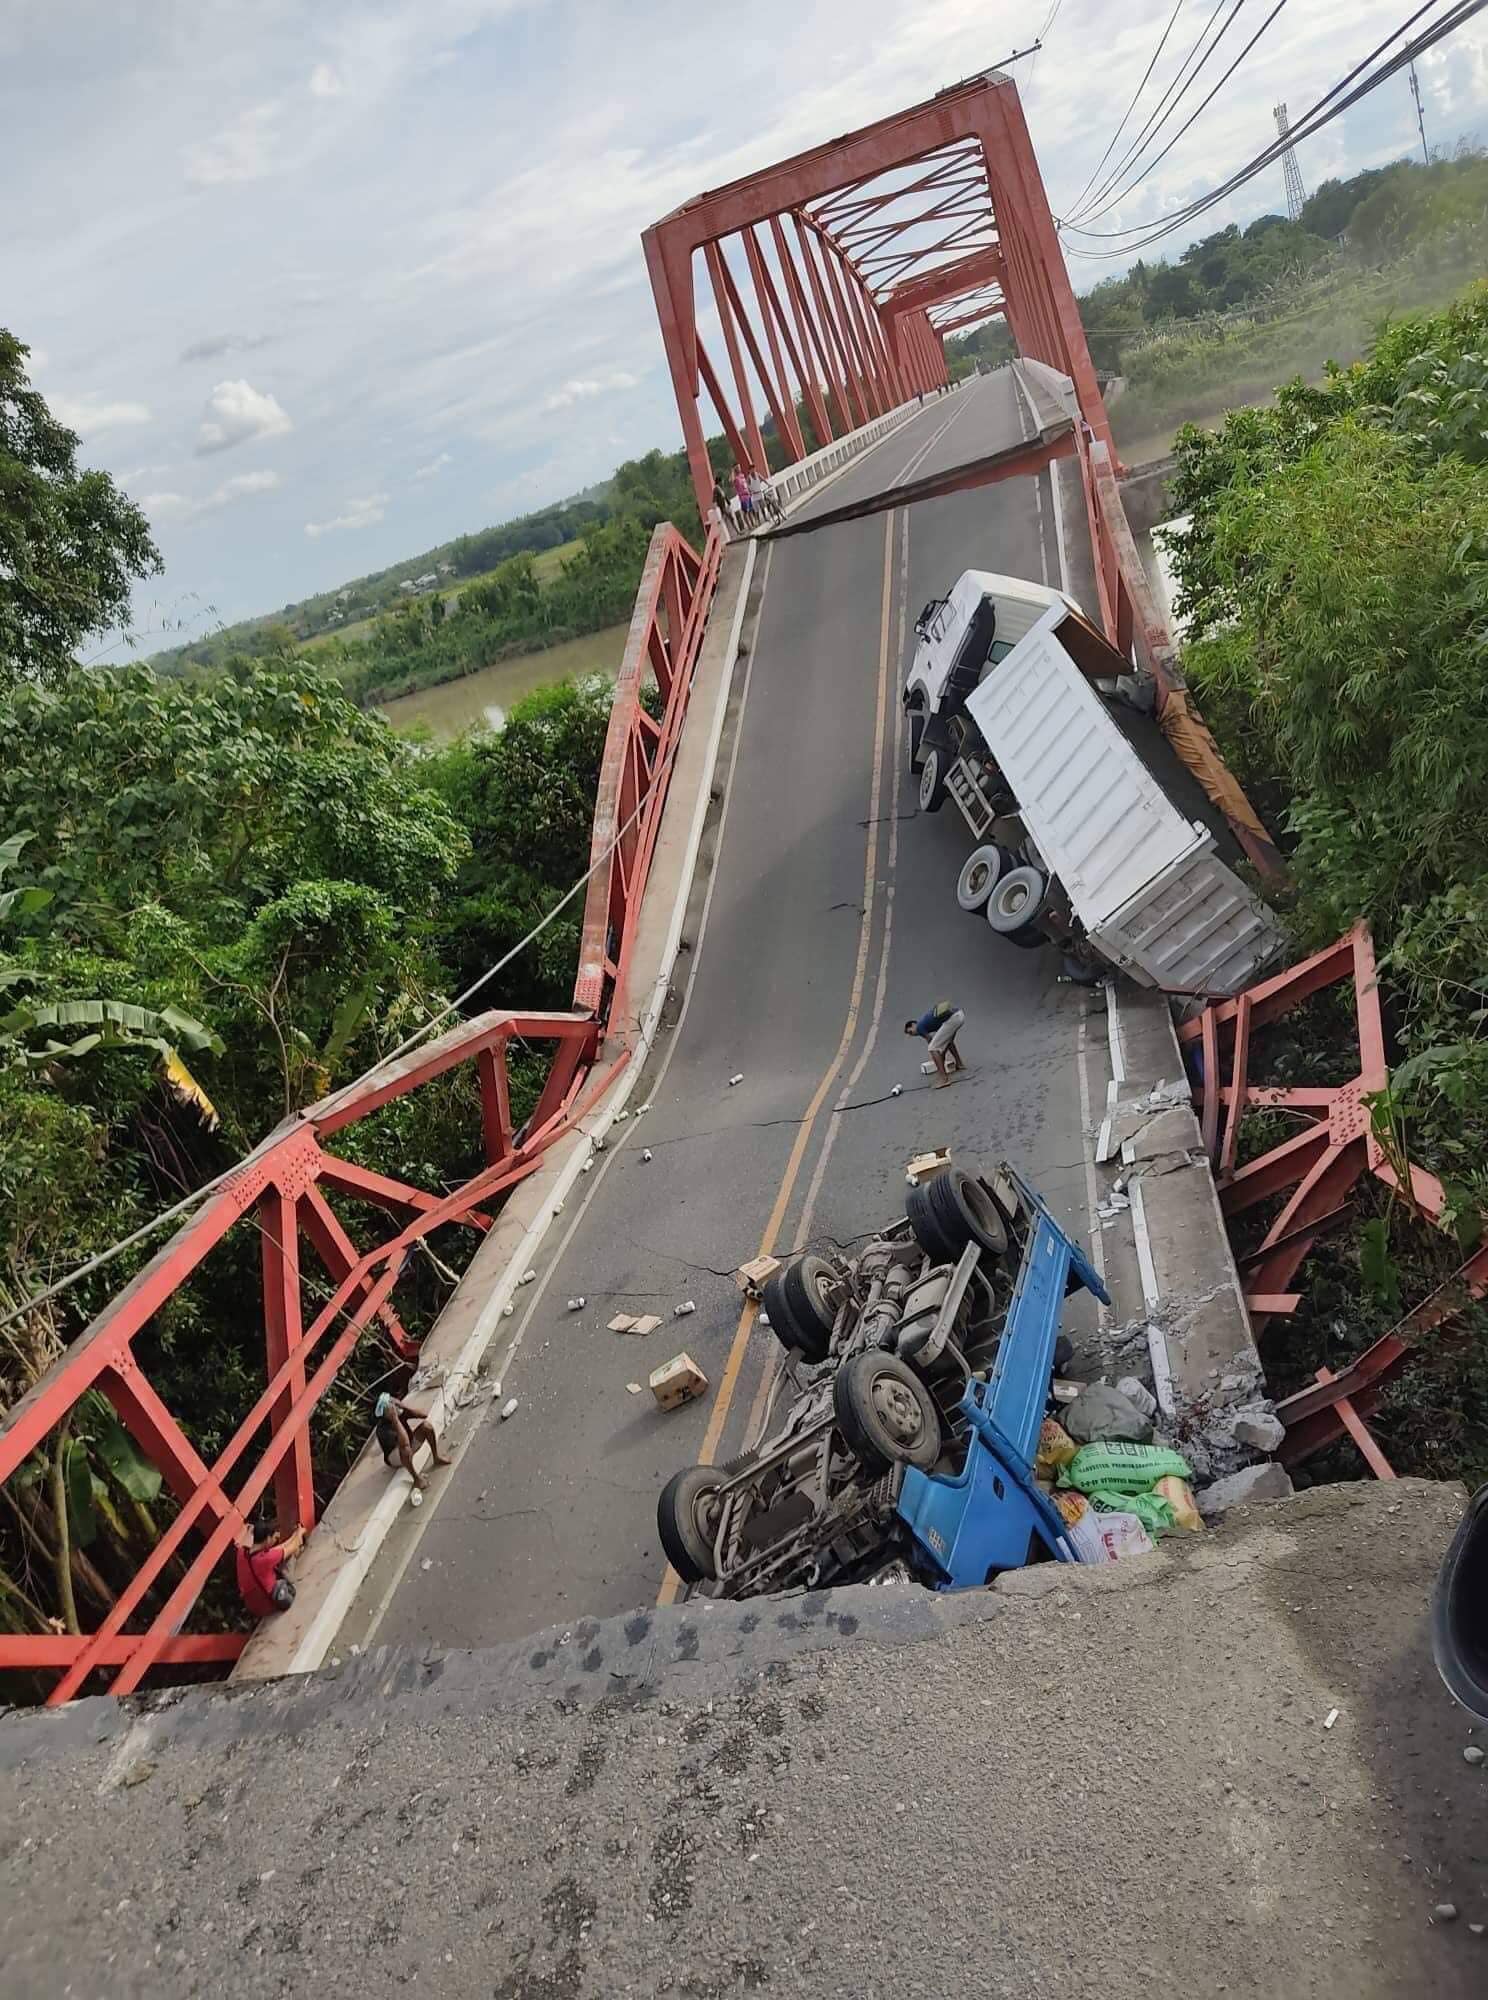 A section of the Wawa Bridge (also known as the Carlos P. Romulo Bridge) in Bayambang town, Pangasinan province, collapsed